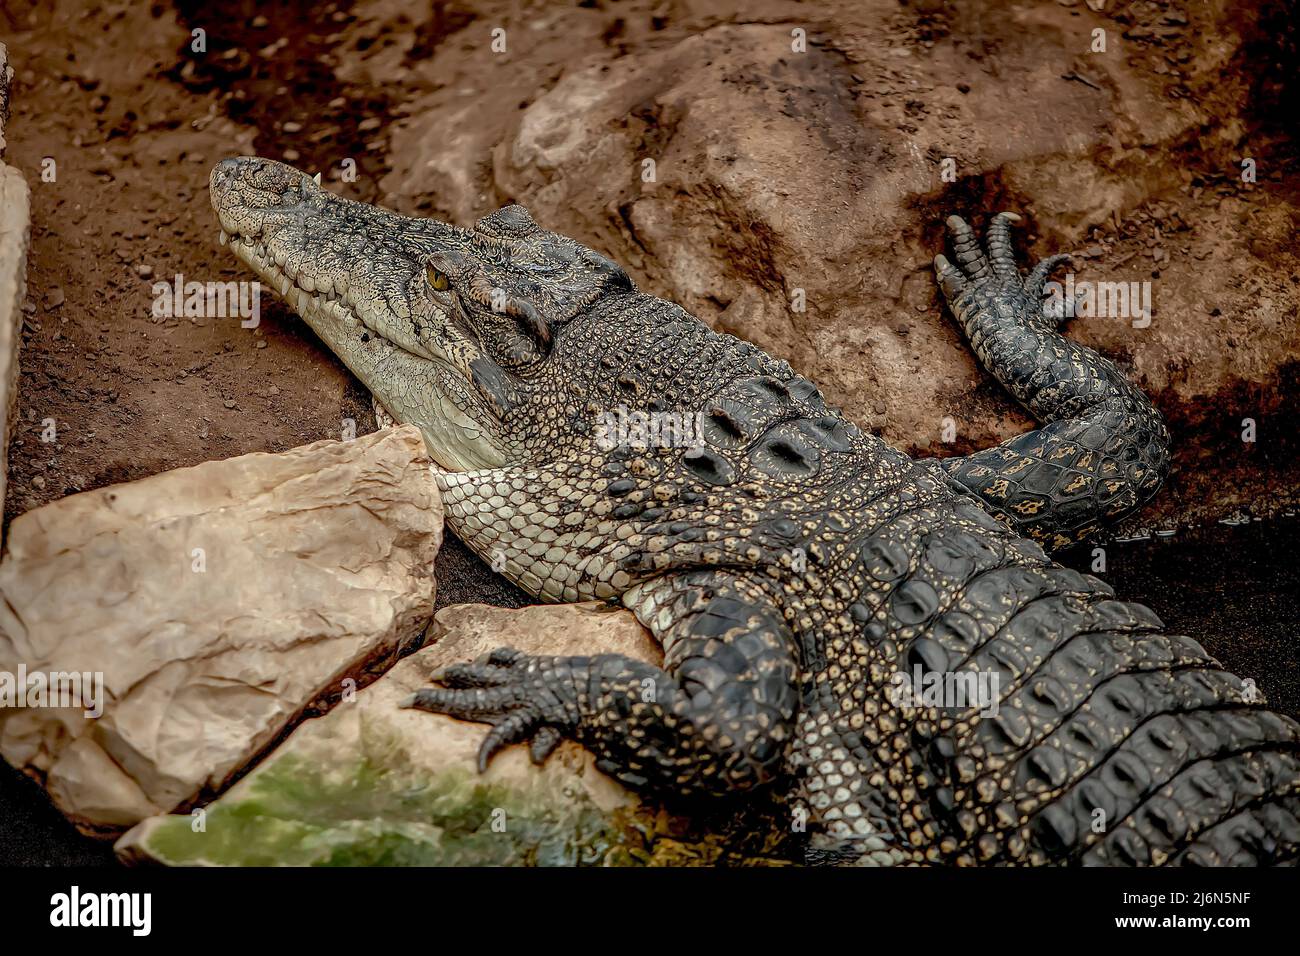 marine crocodile of the crocodylidae family, the largest reptile on the planet. Stock Photo